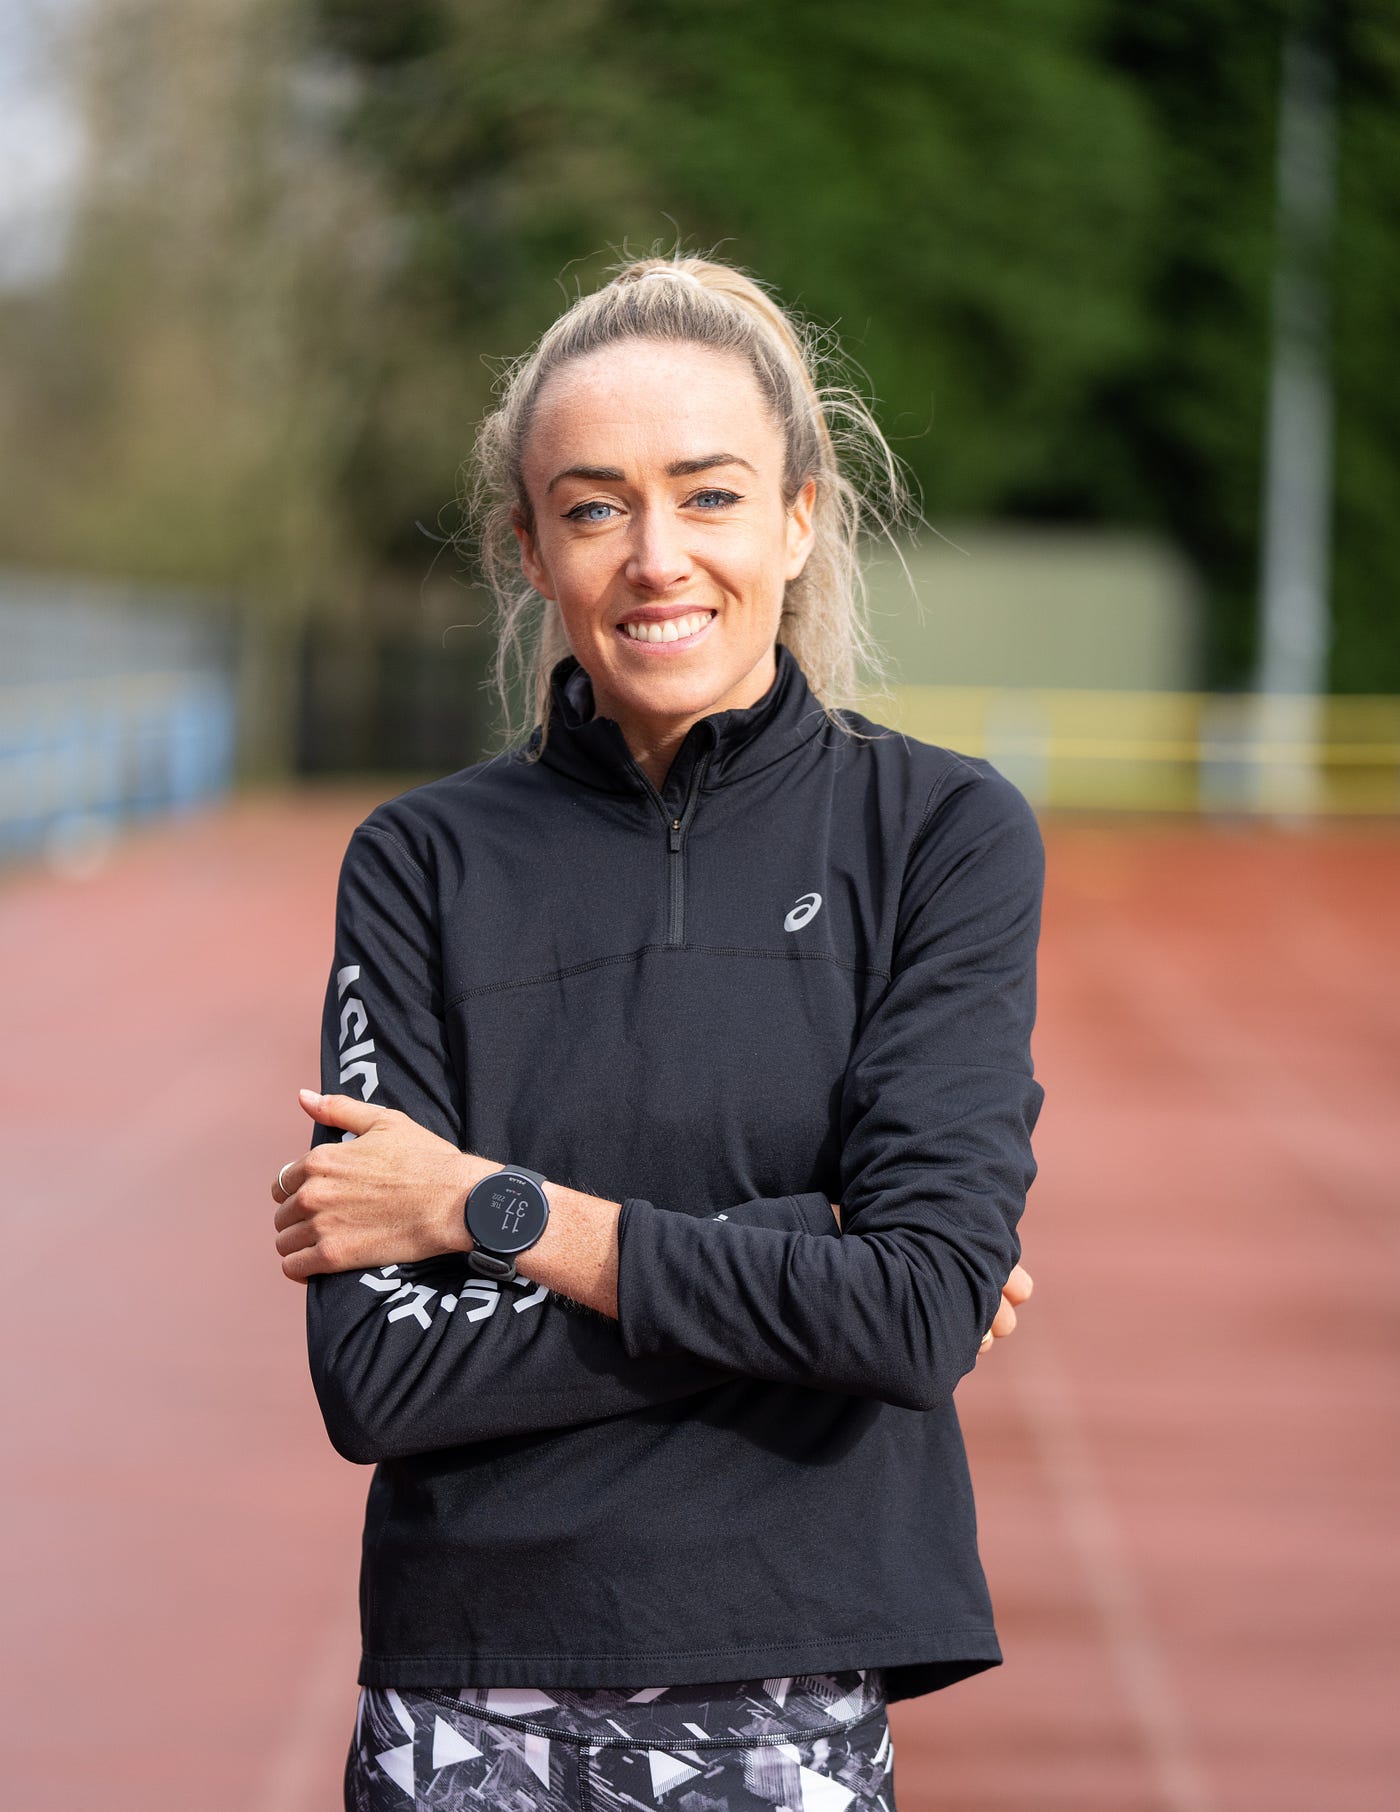 Olympian Eilish McColgan On The Workout Routines Of Professional Athletes, by Maria Angelova, CEO of Rebellious Intl., Authority Magazine